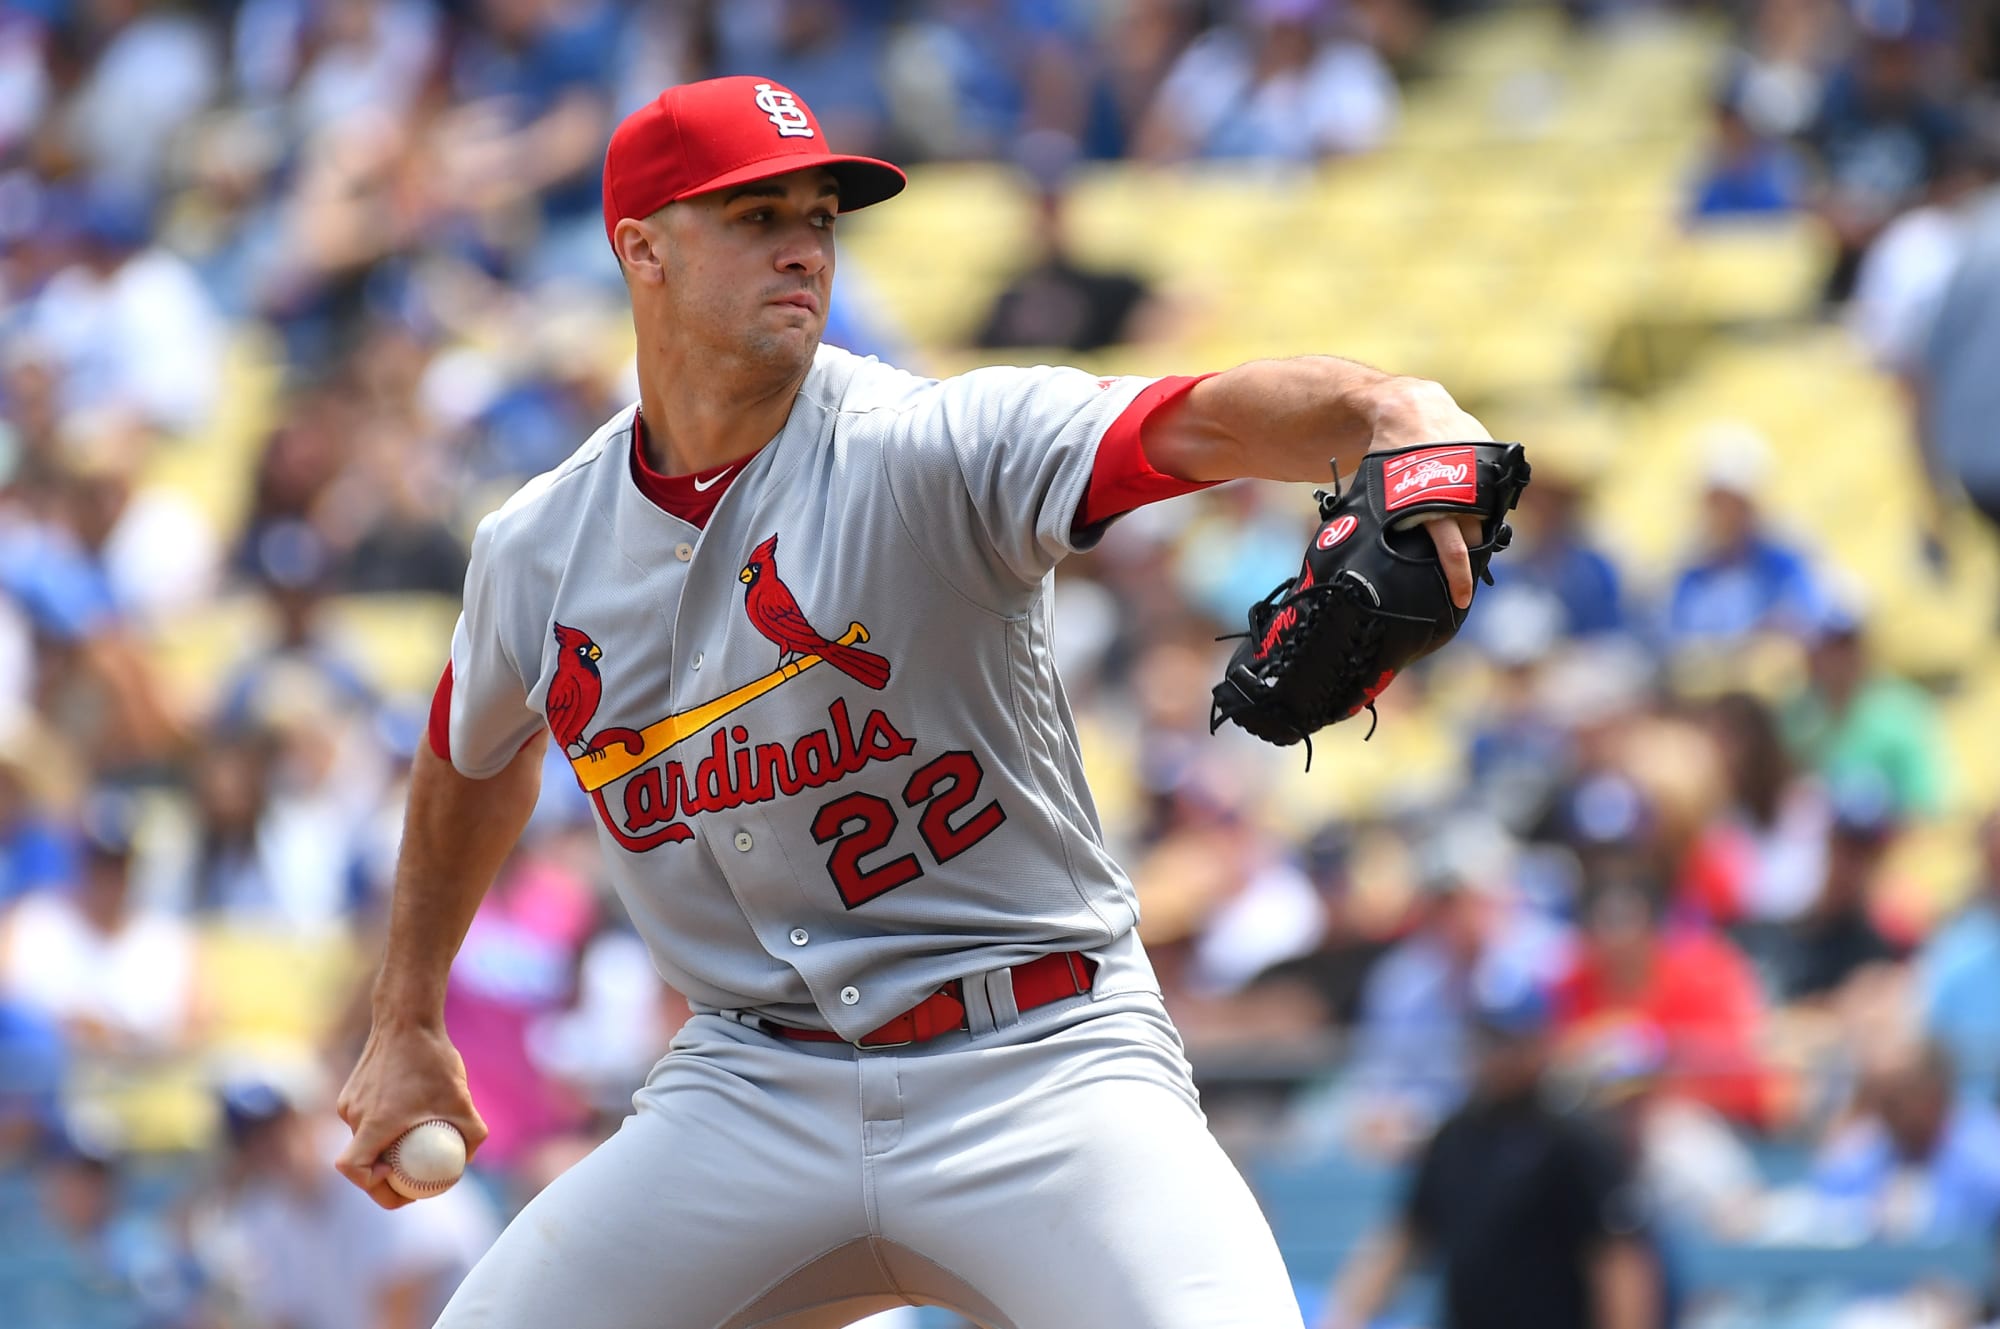 St. Louis Cardinals: Jack Flaherty has quietly returned to ace level